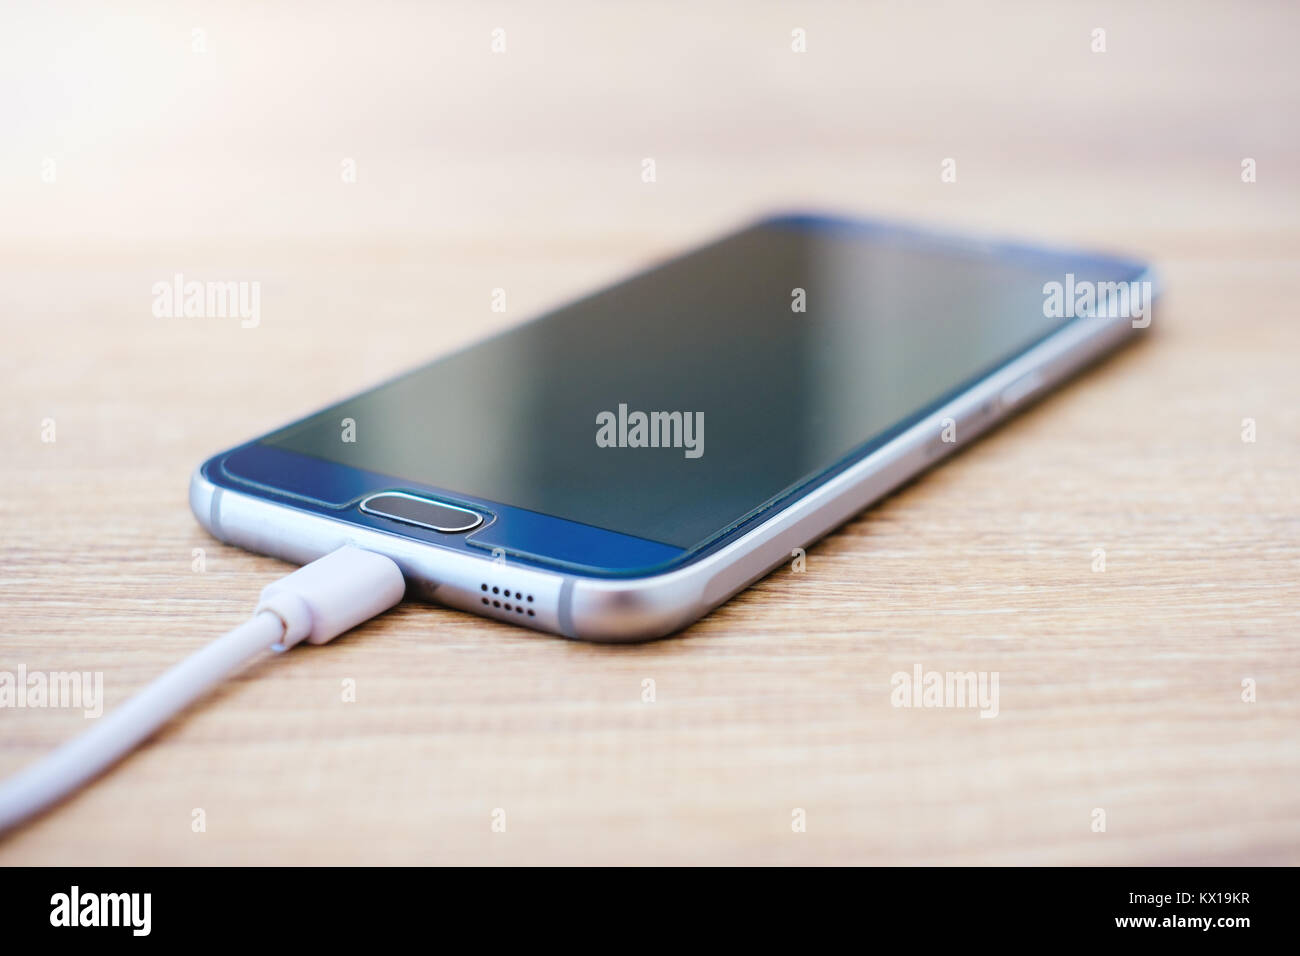 Mobile Phone Plugged In High Resolution Stock Photography and Images - Alamy